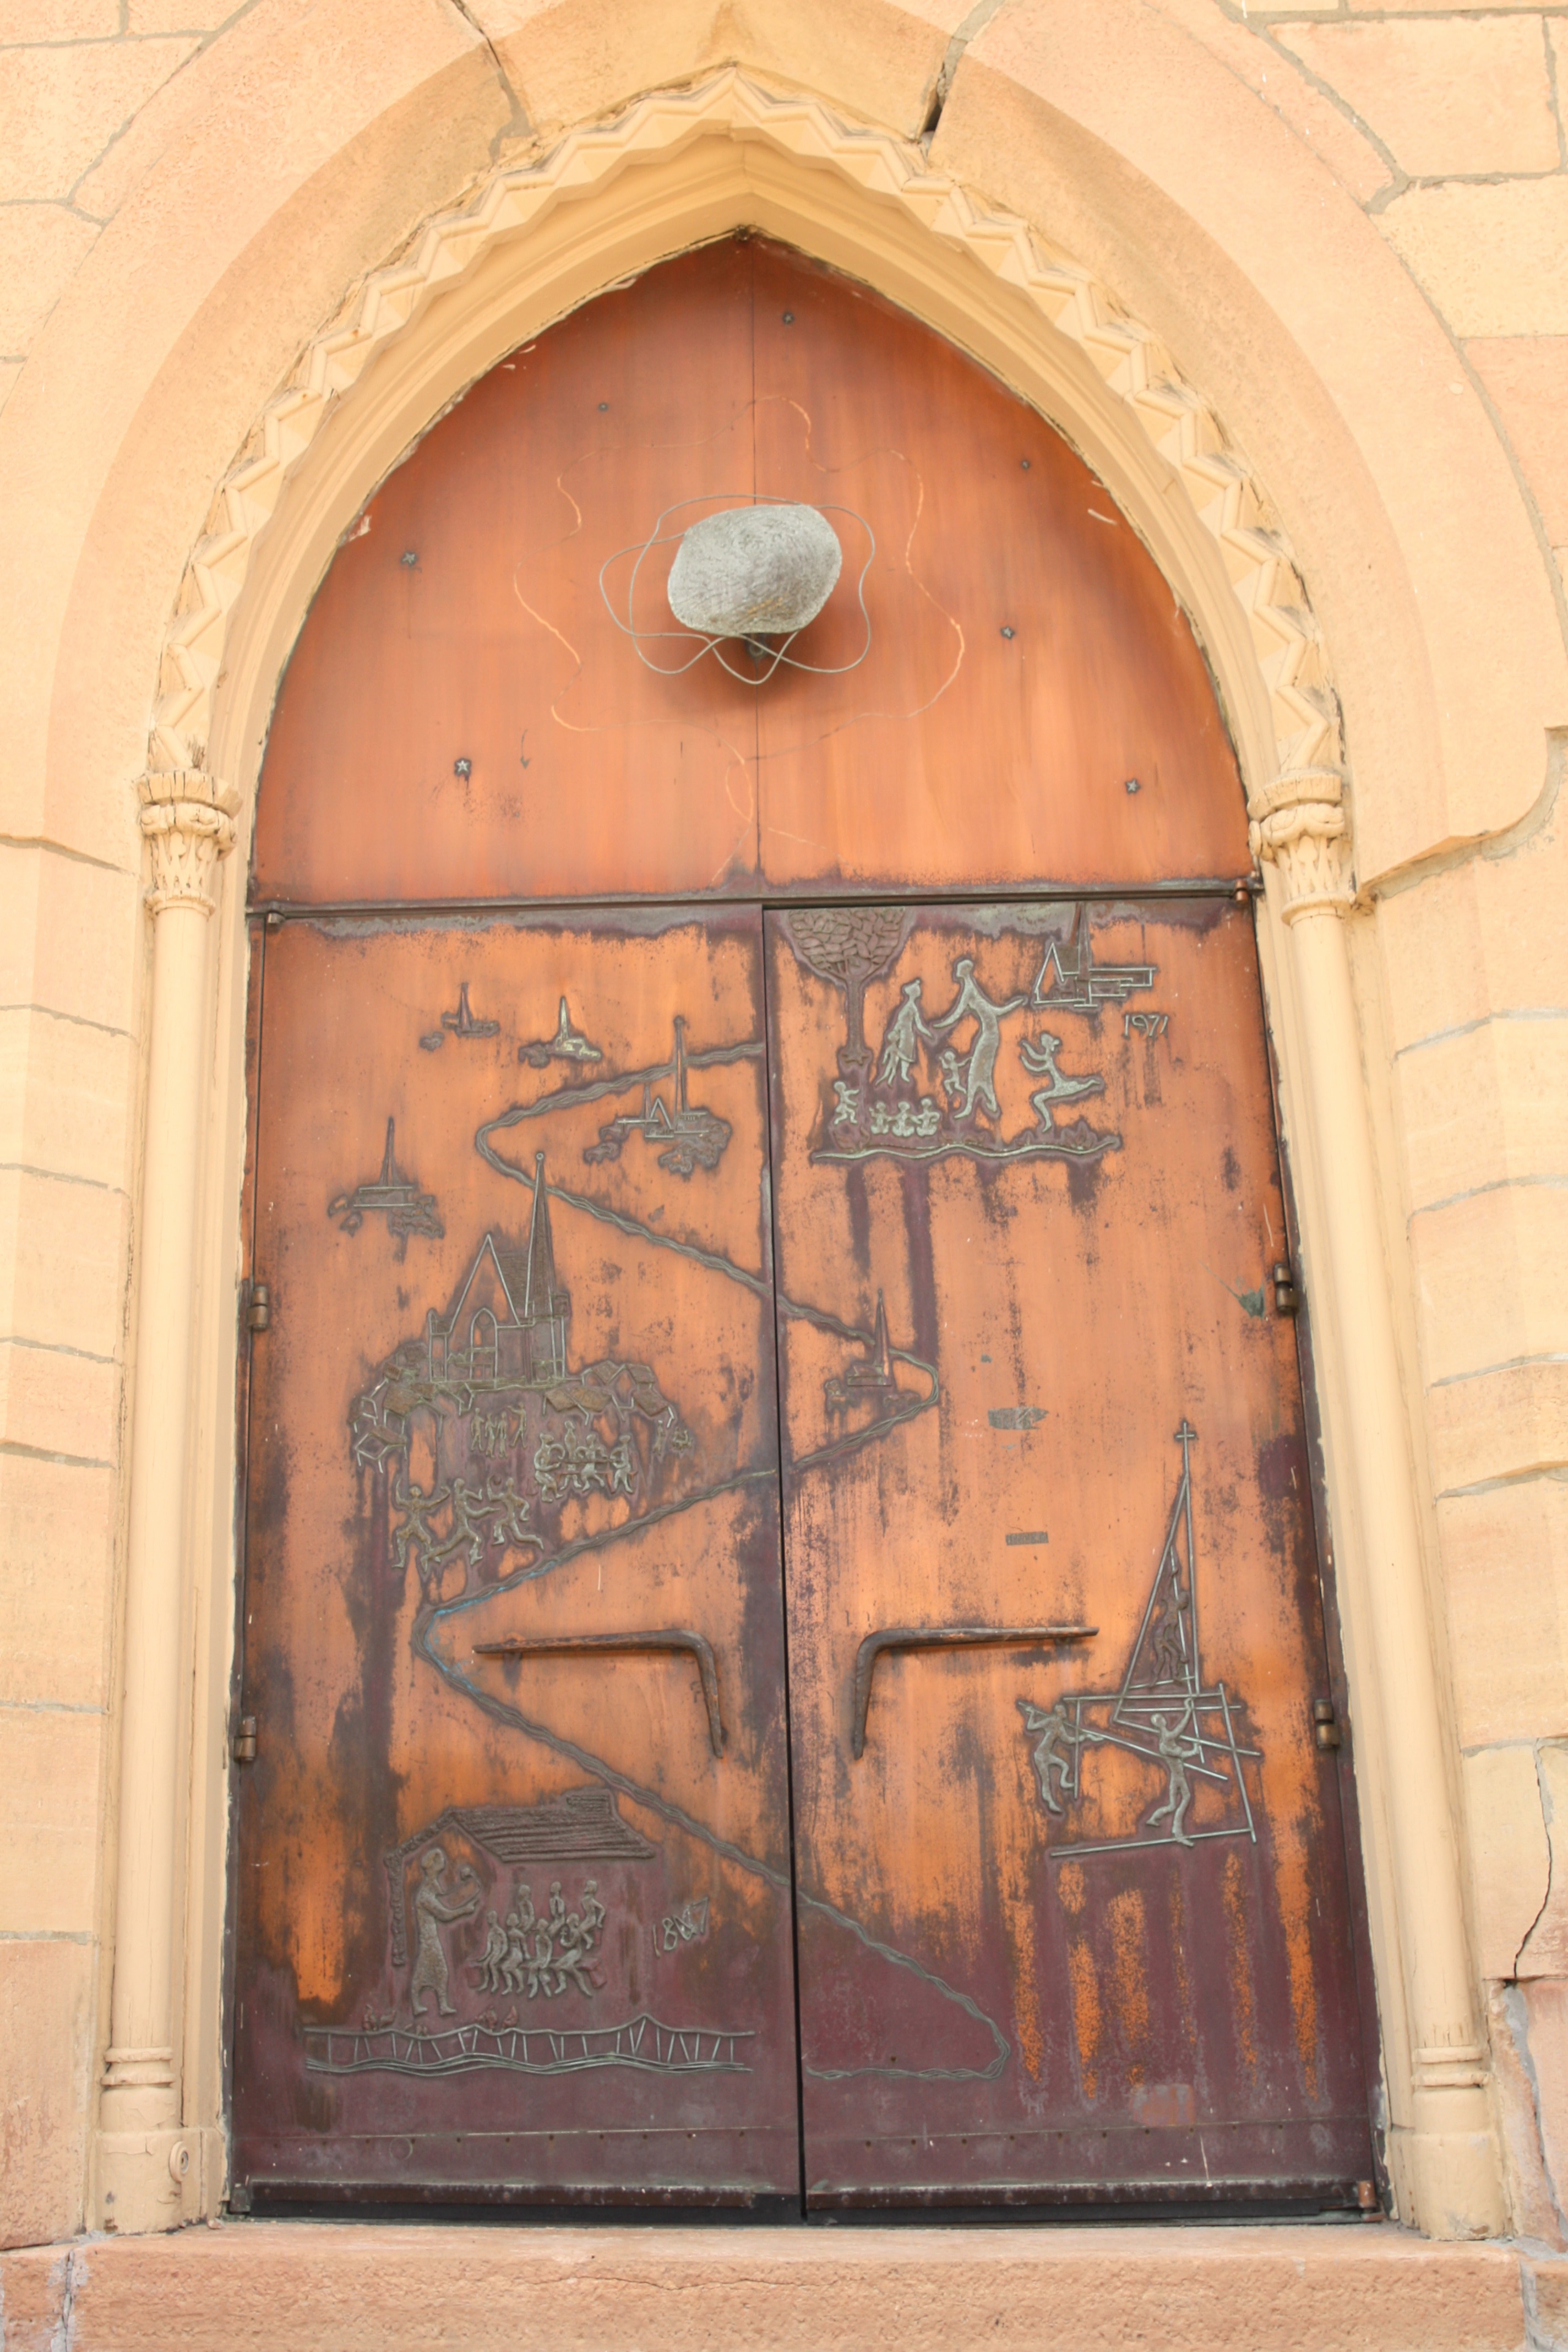 Copper doors, etched with scenes from First Baptist’s history, were added in 1971.